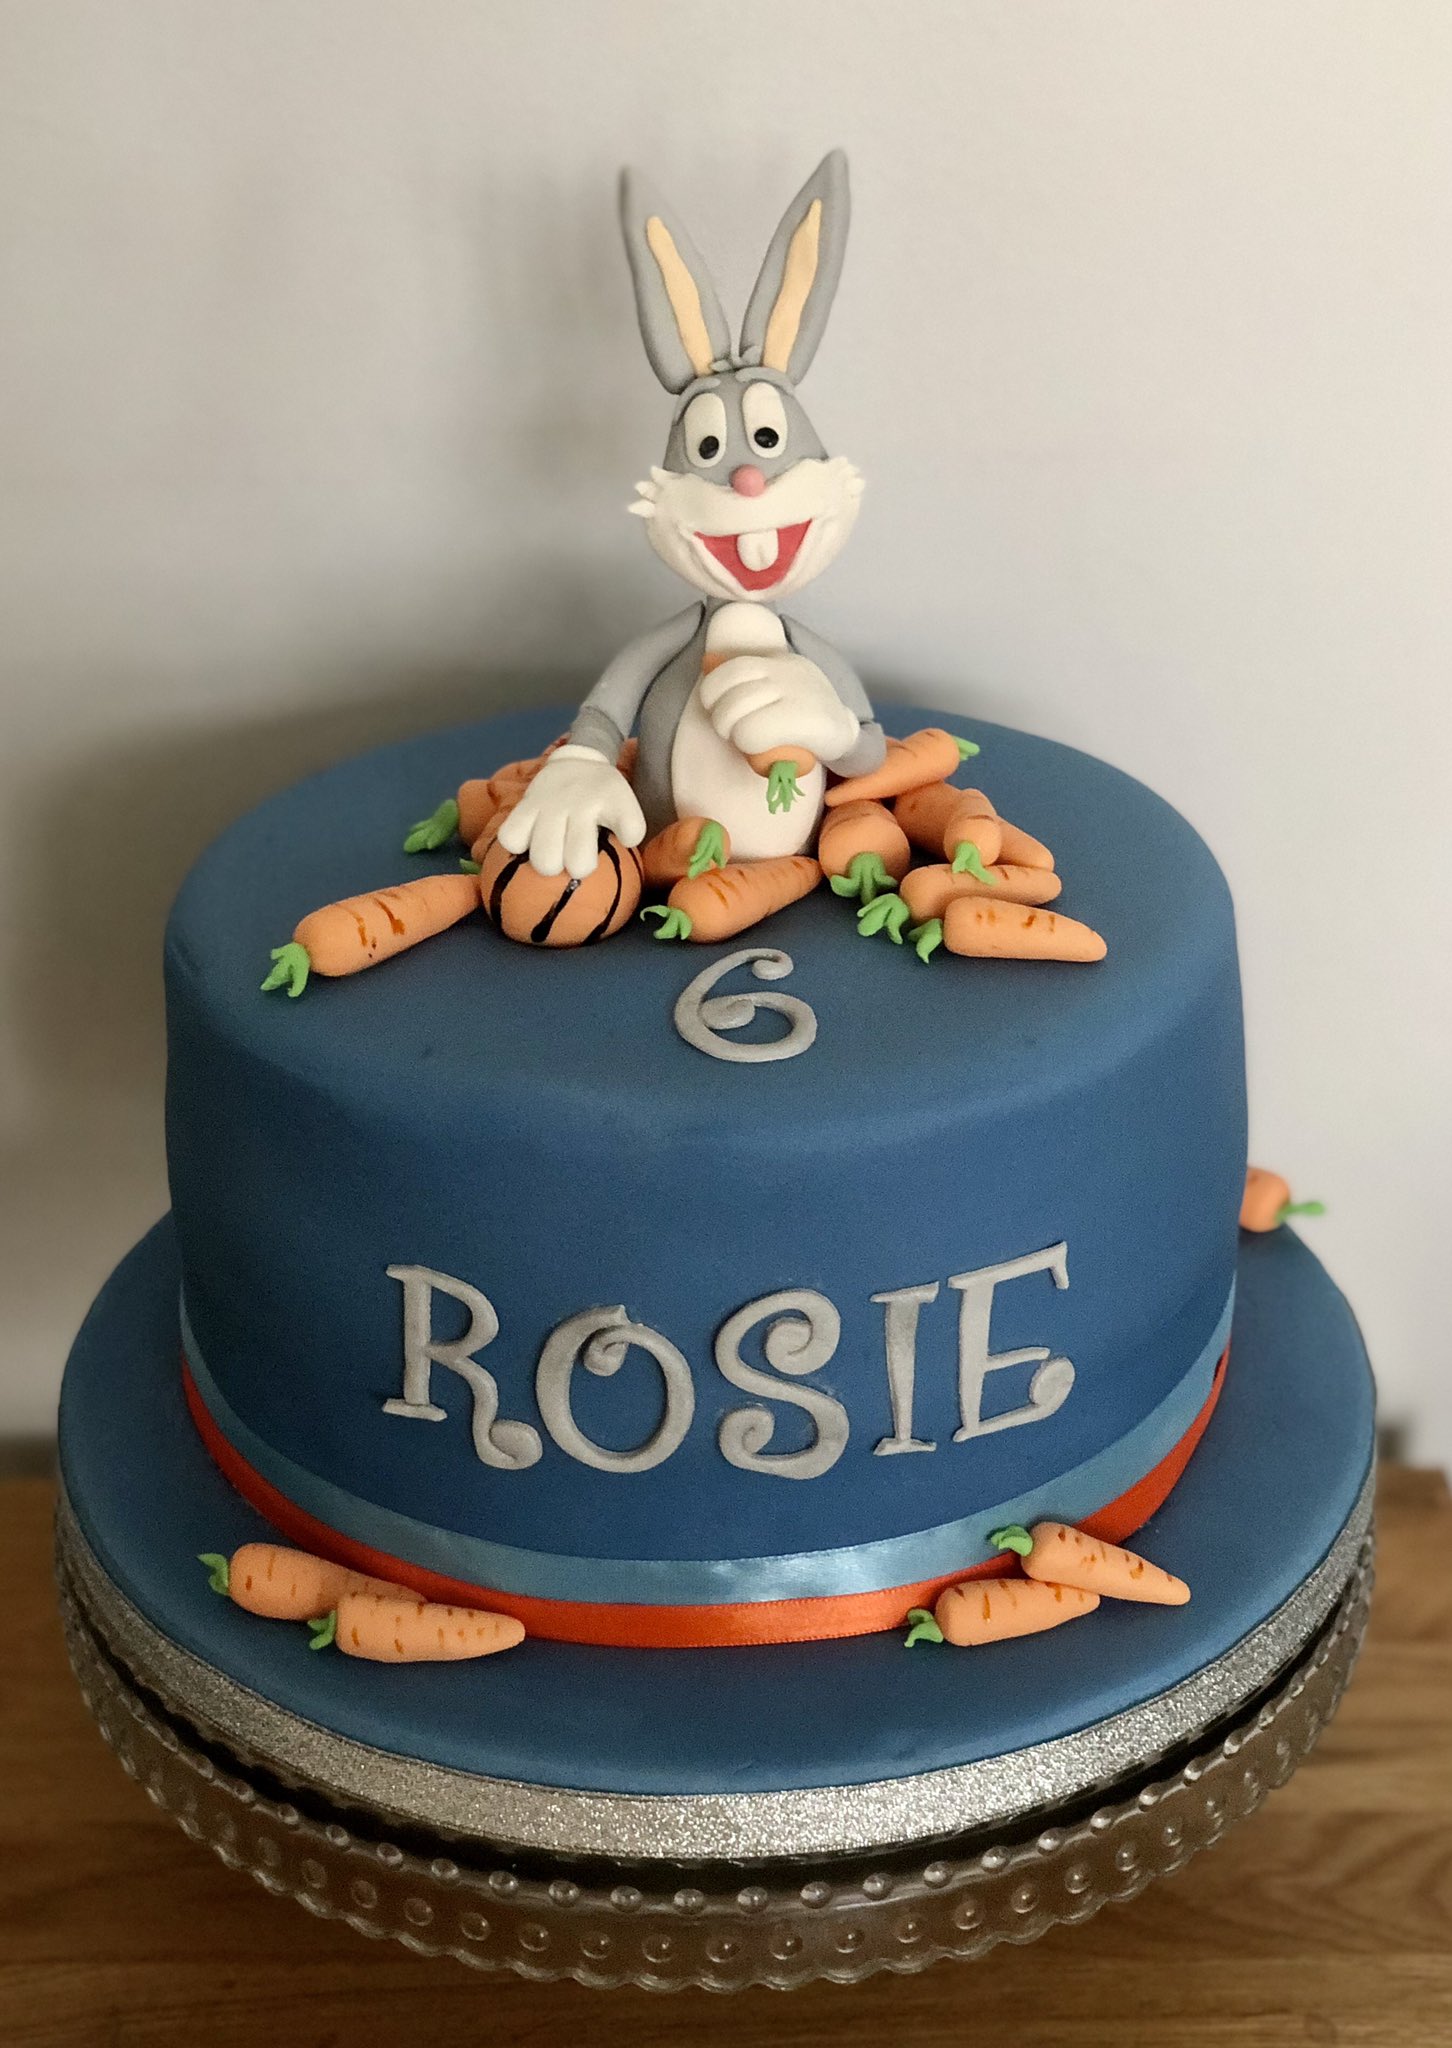 Hilltop House Bakes on Twitter: "Birthday cake ready for a little one's party today. She loves Bugs Bunny ever since she saw Space Jam a few months ago. This is, as requested, “